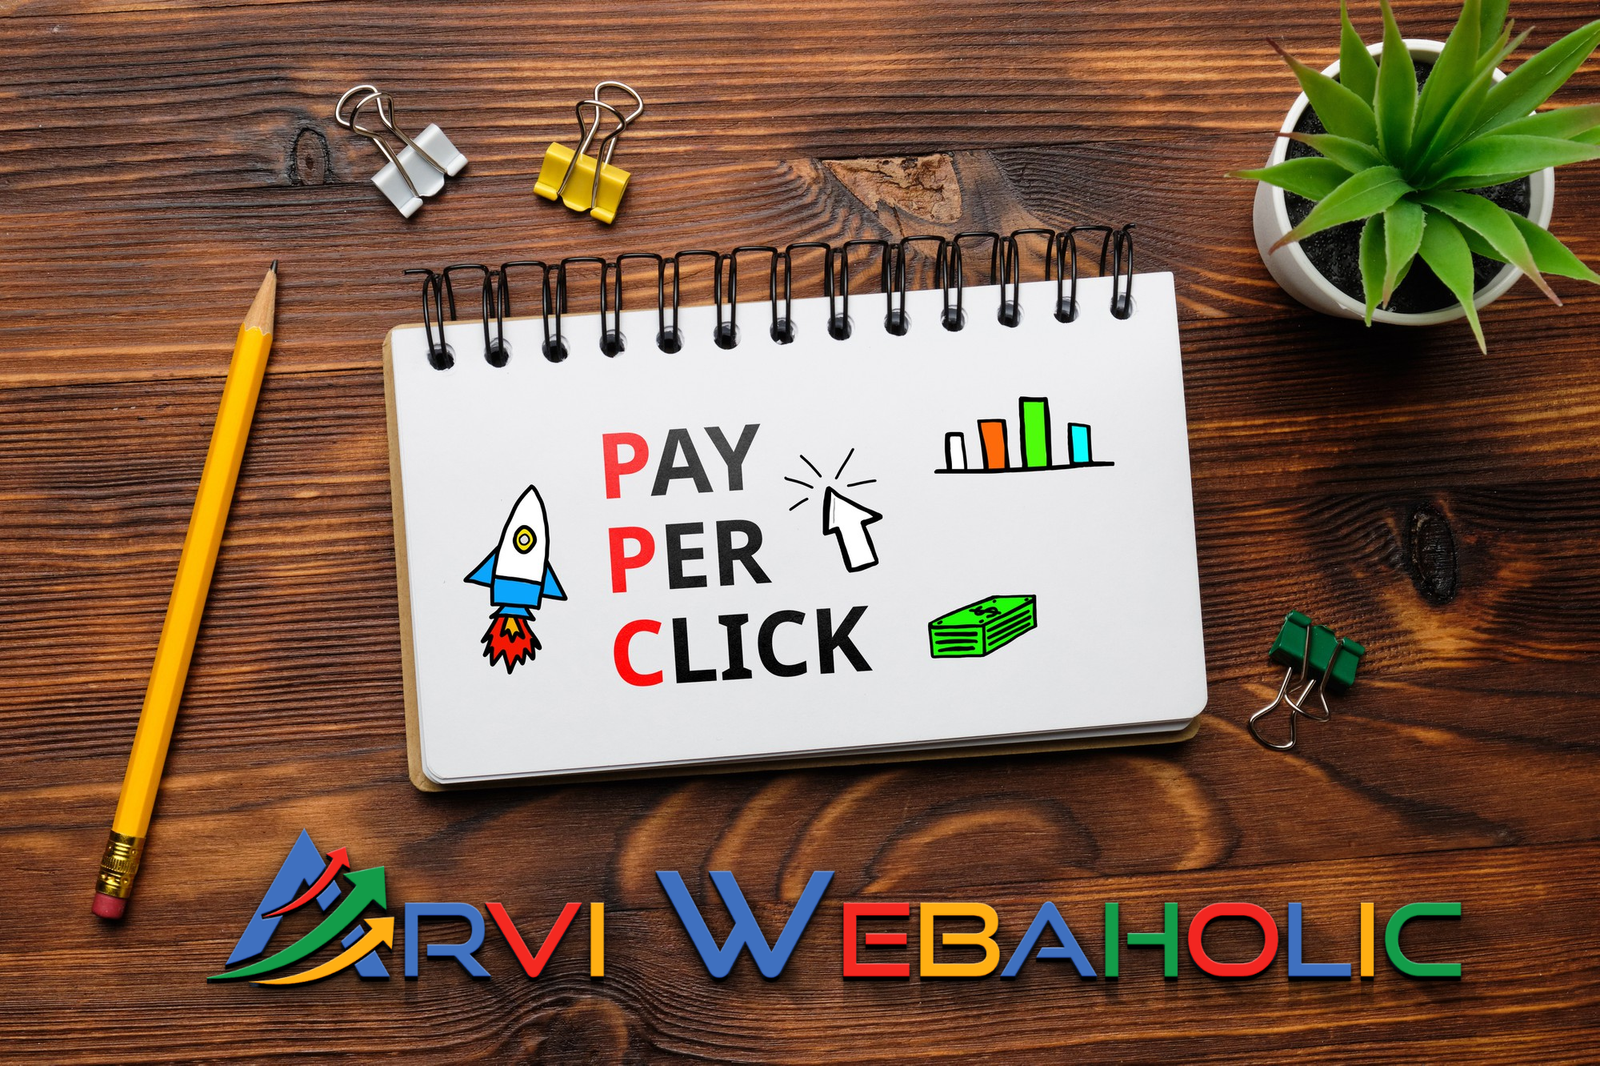 Pay-Per-Click (PPC) advertising